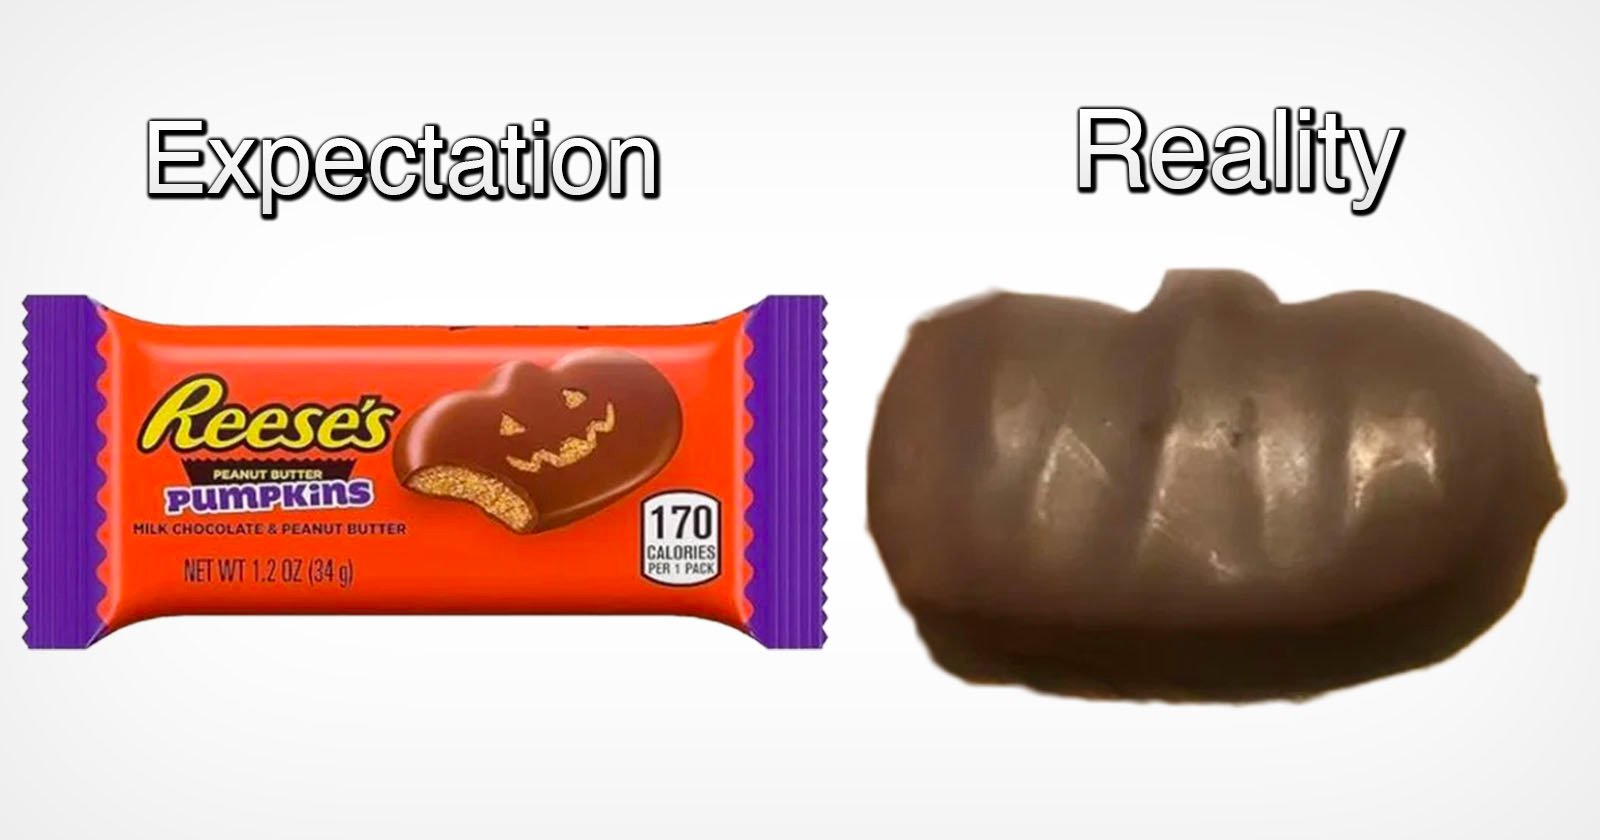  woman sues reese chocolate misleading photos packaging 